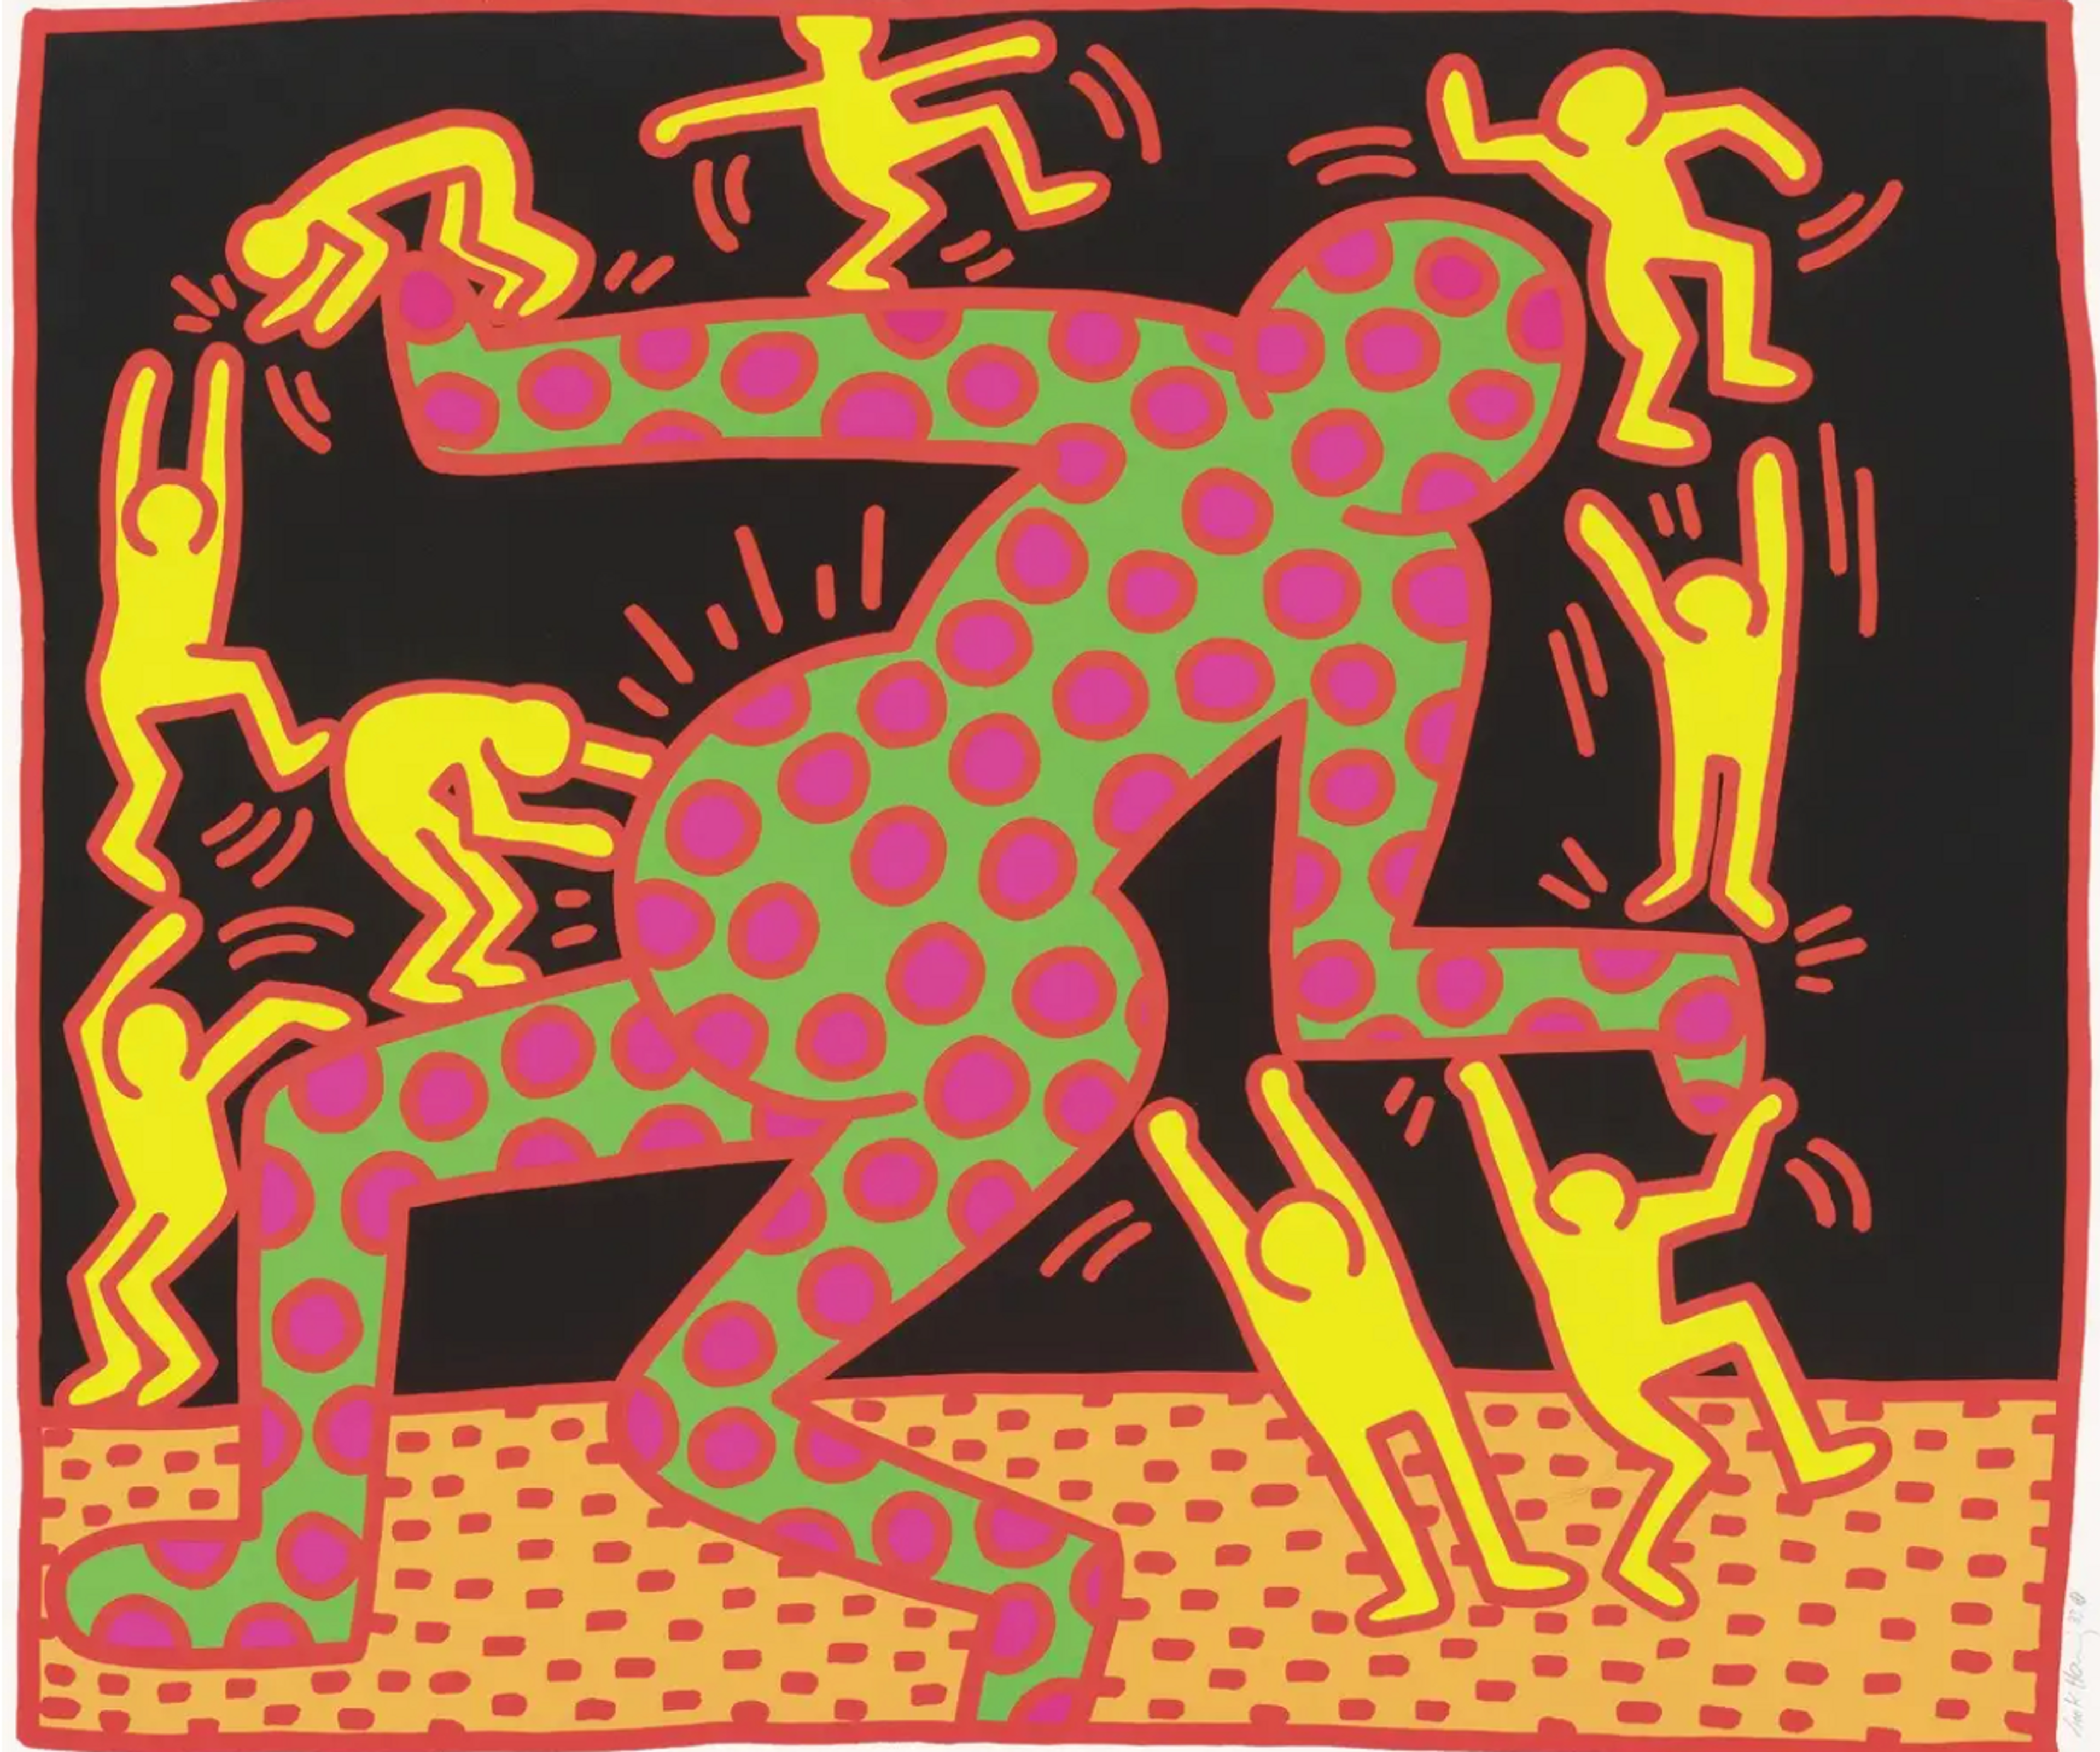 Fertility 3 by Keith Haring